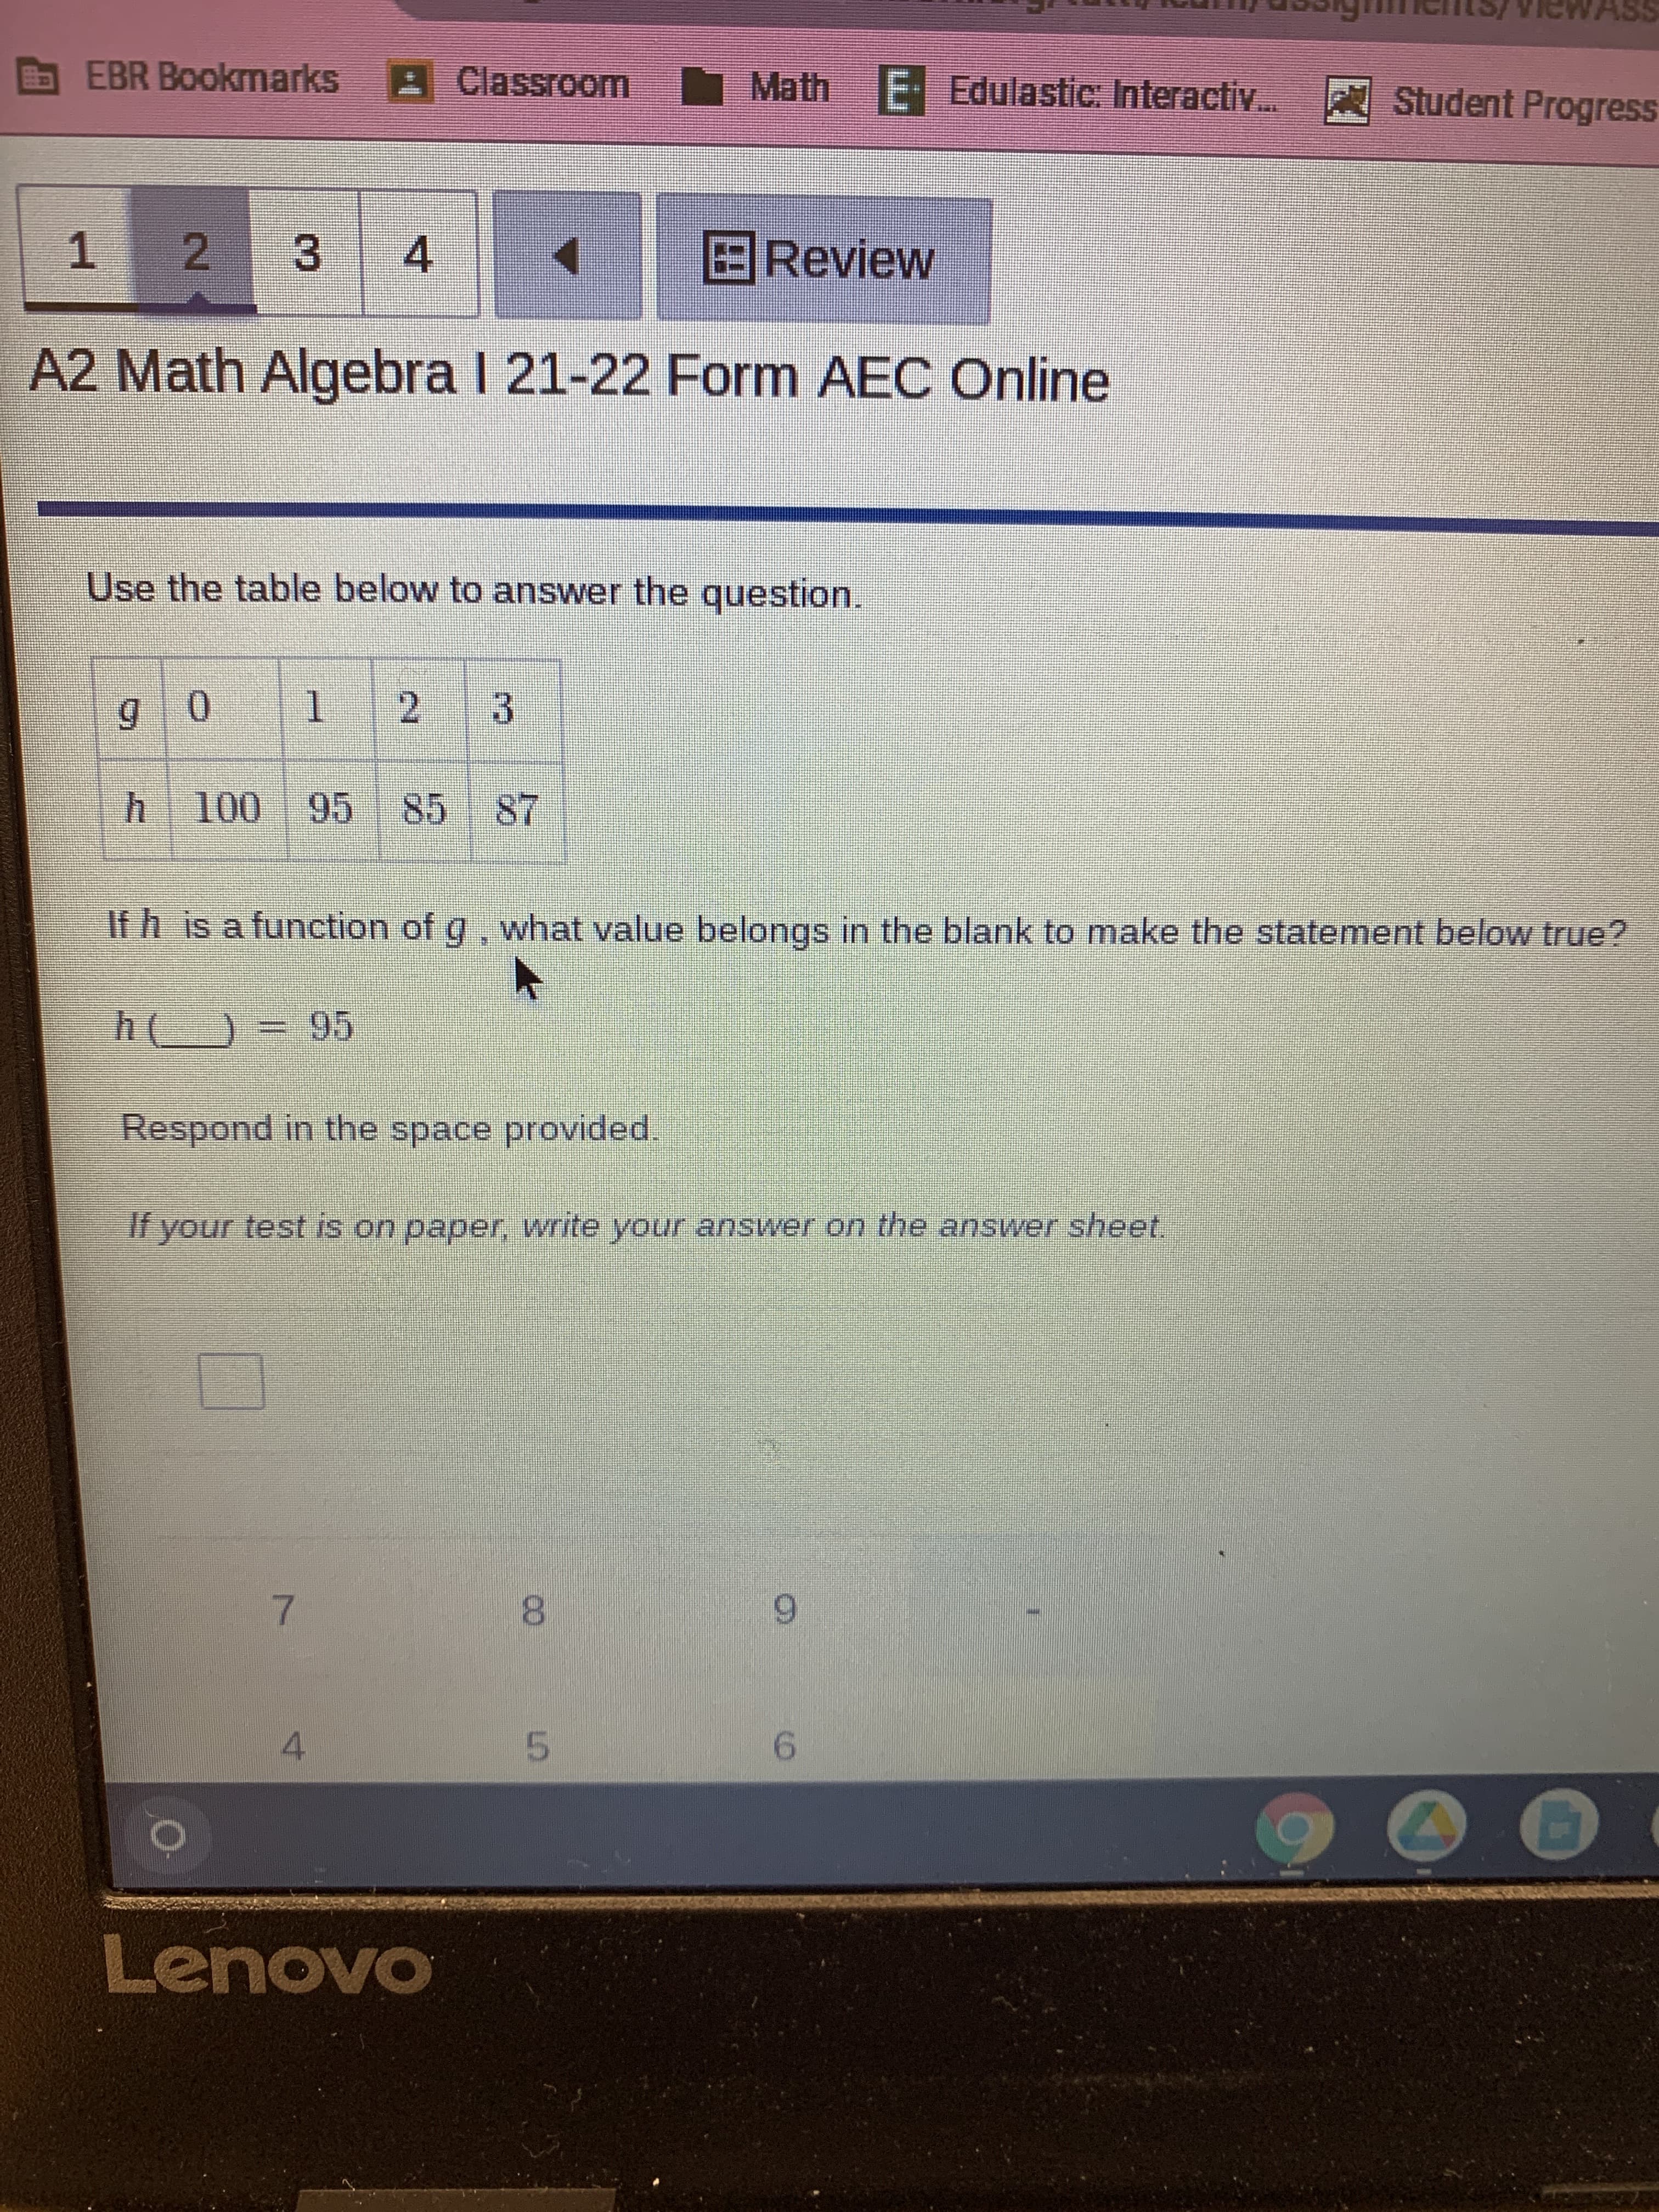 00
EBR Bookmarks
Classroom
om Math E- Edulastic: Interactiv..
Student Progress
BReview
1.
A2 Math Algebra I 21-22 Form AEC Online
Use the table below to answer the question.
2.
3.
95 85
If h is a function of g, what value belongs in the blank to make the statement below true?
Respond in the space provided.
If your test is on paper, write your answer on the answer sheet.
9.
8.
5.
9.
4.
